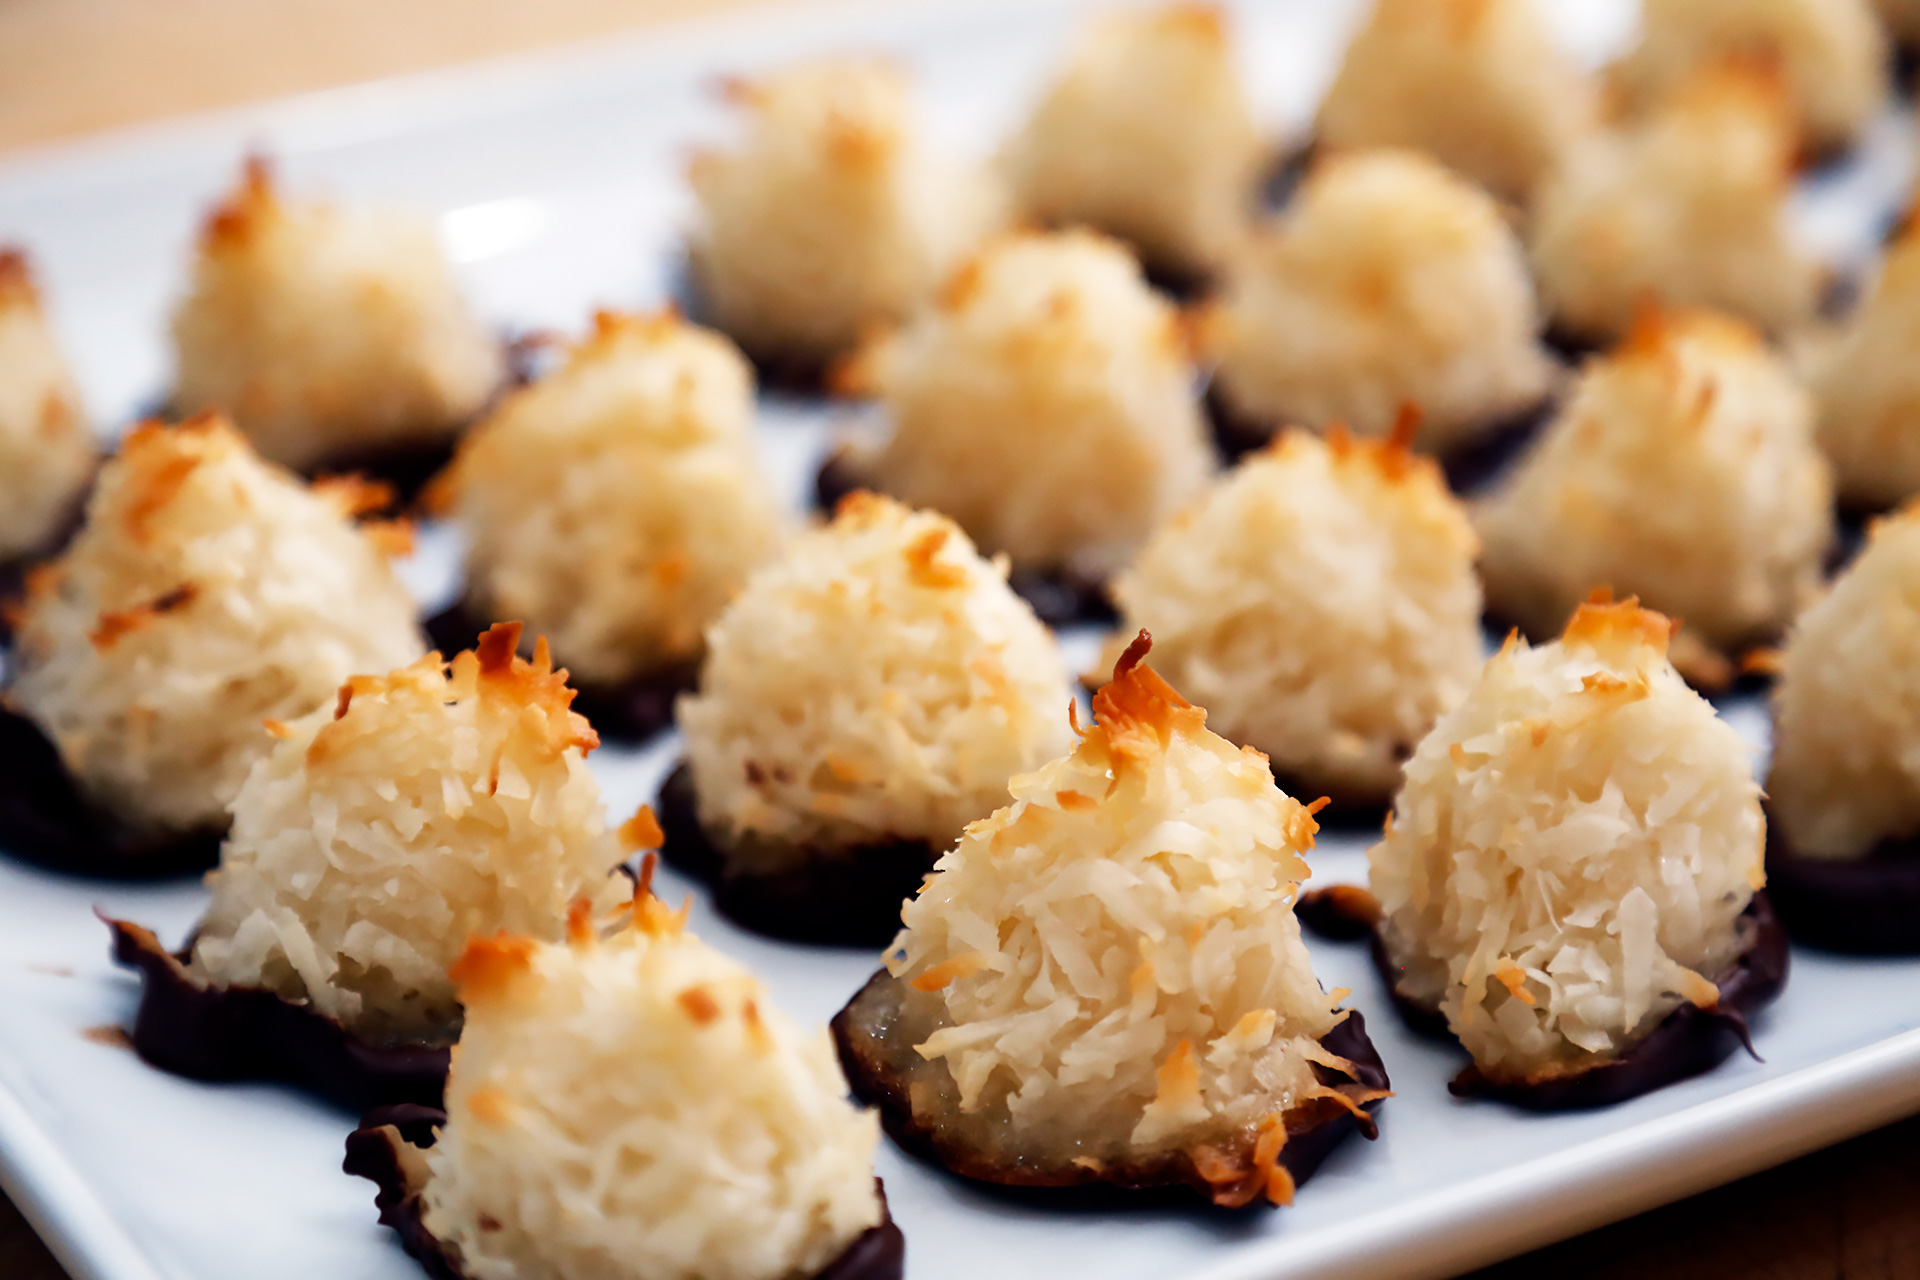  Chocolate-Dipped Coconut Macaroons